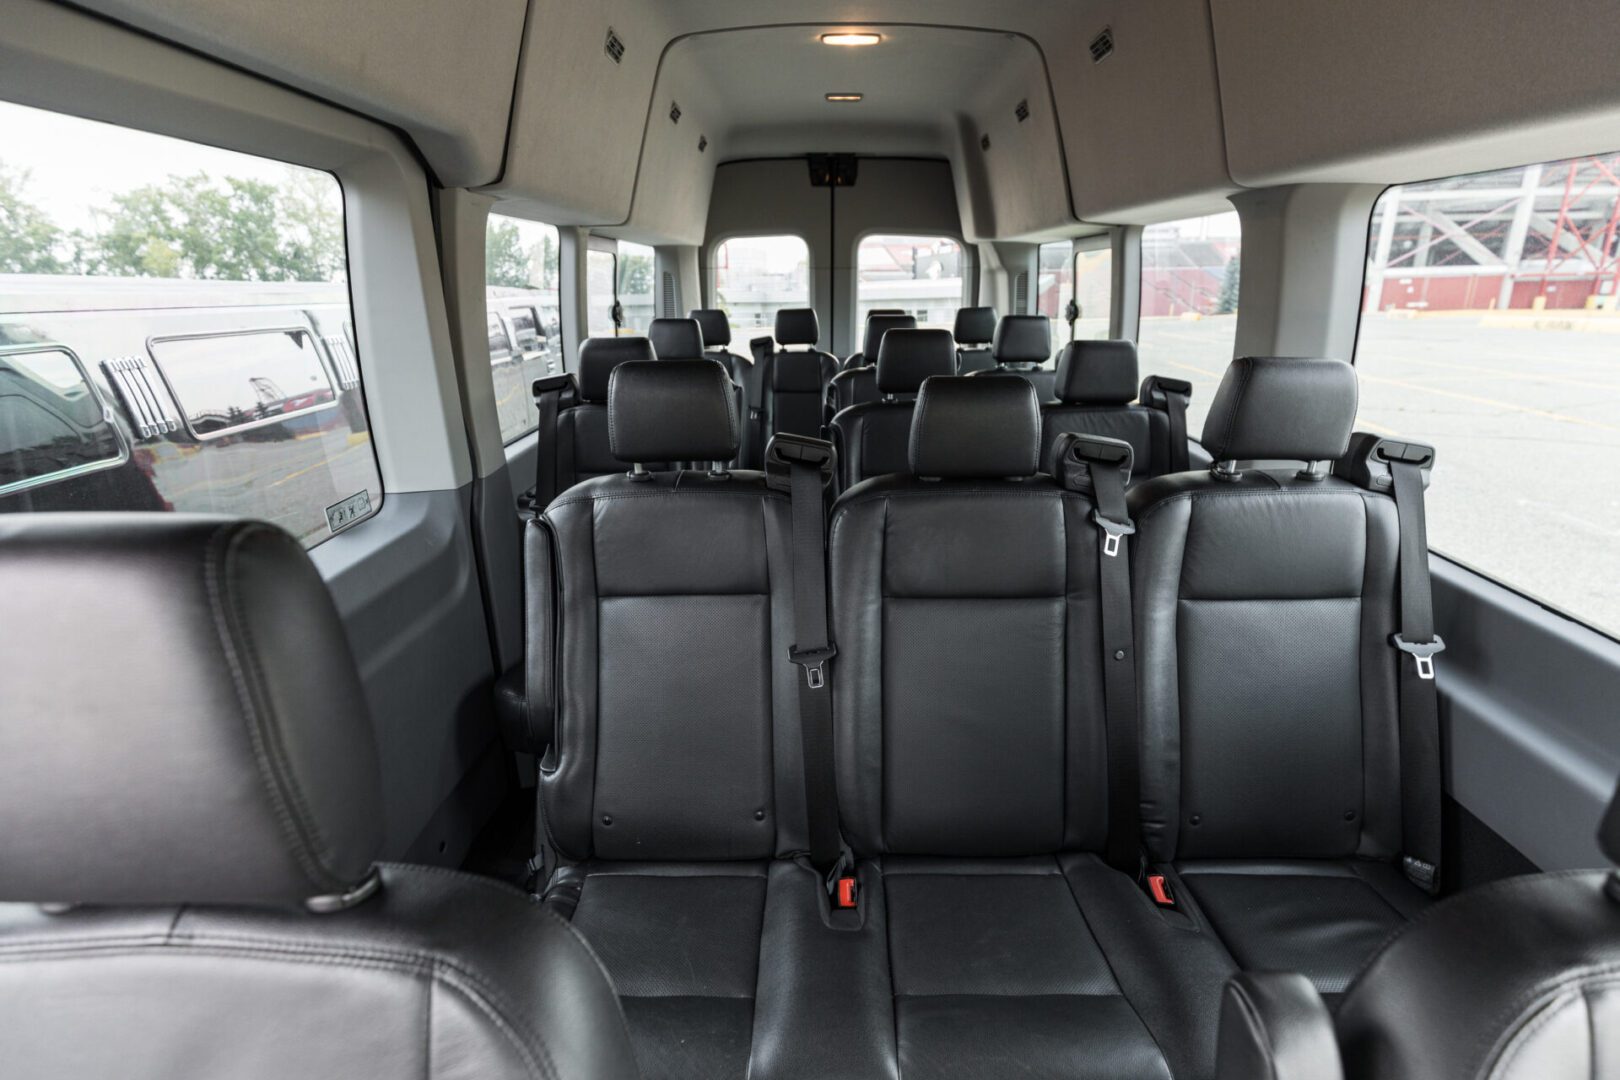 Interior of a Ford Transit van with black leather seats